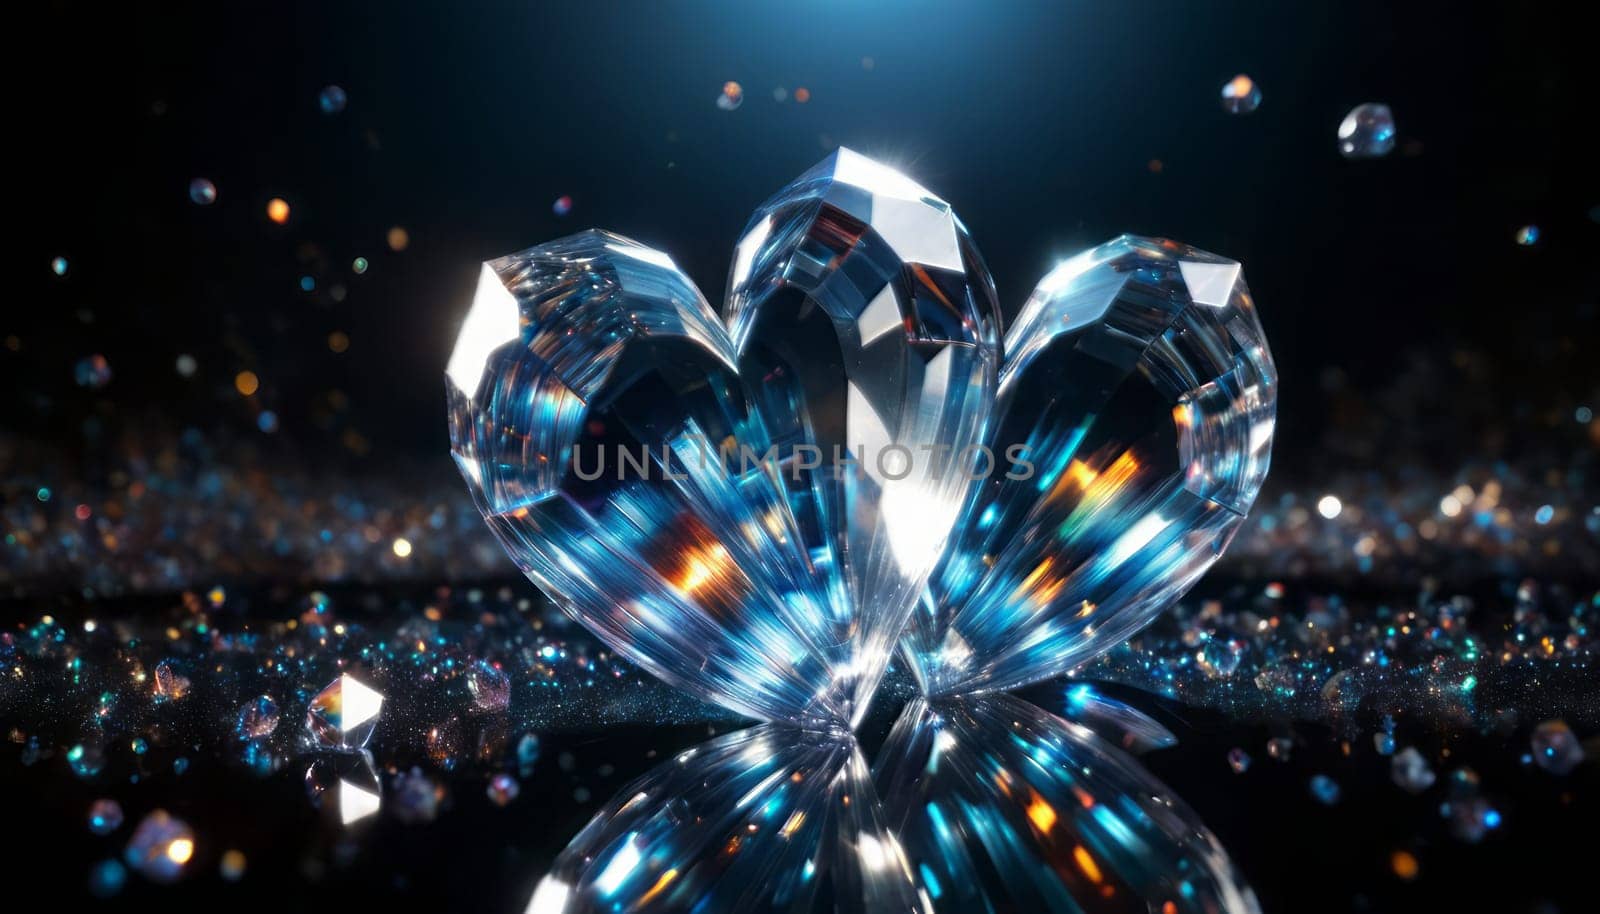 two heart shaped blue diamonds, crystal's, translucent, transparent, close-up with deep depth of field Valentine's realistic two heart shaped blue diamonds background, transparent colors of the rainbow hearts, against a transparent scattering crystals, falling crystals, glints in the foreground